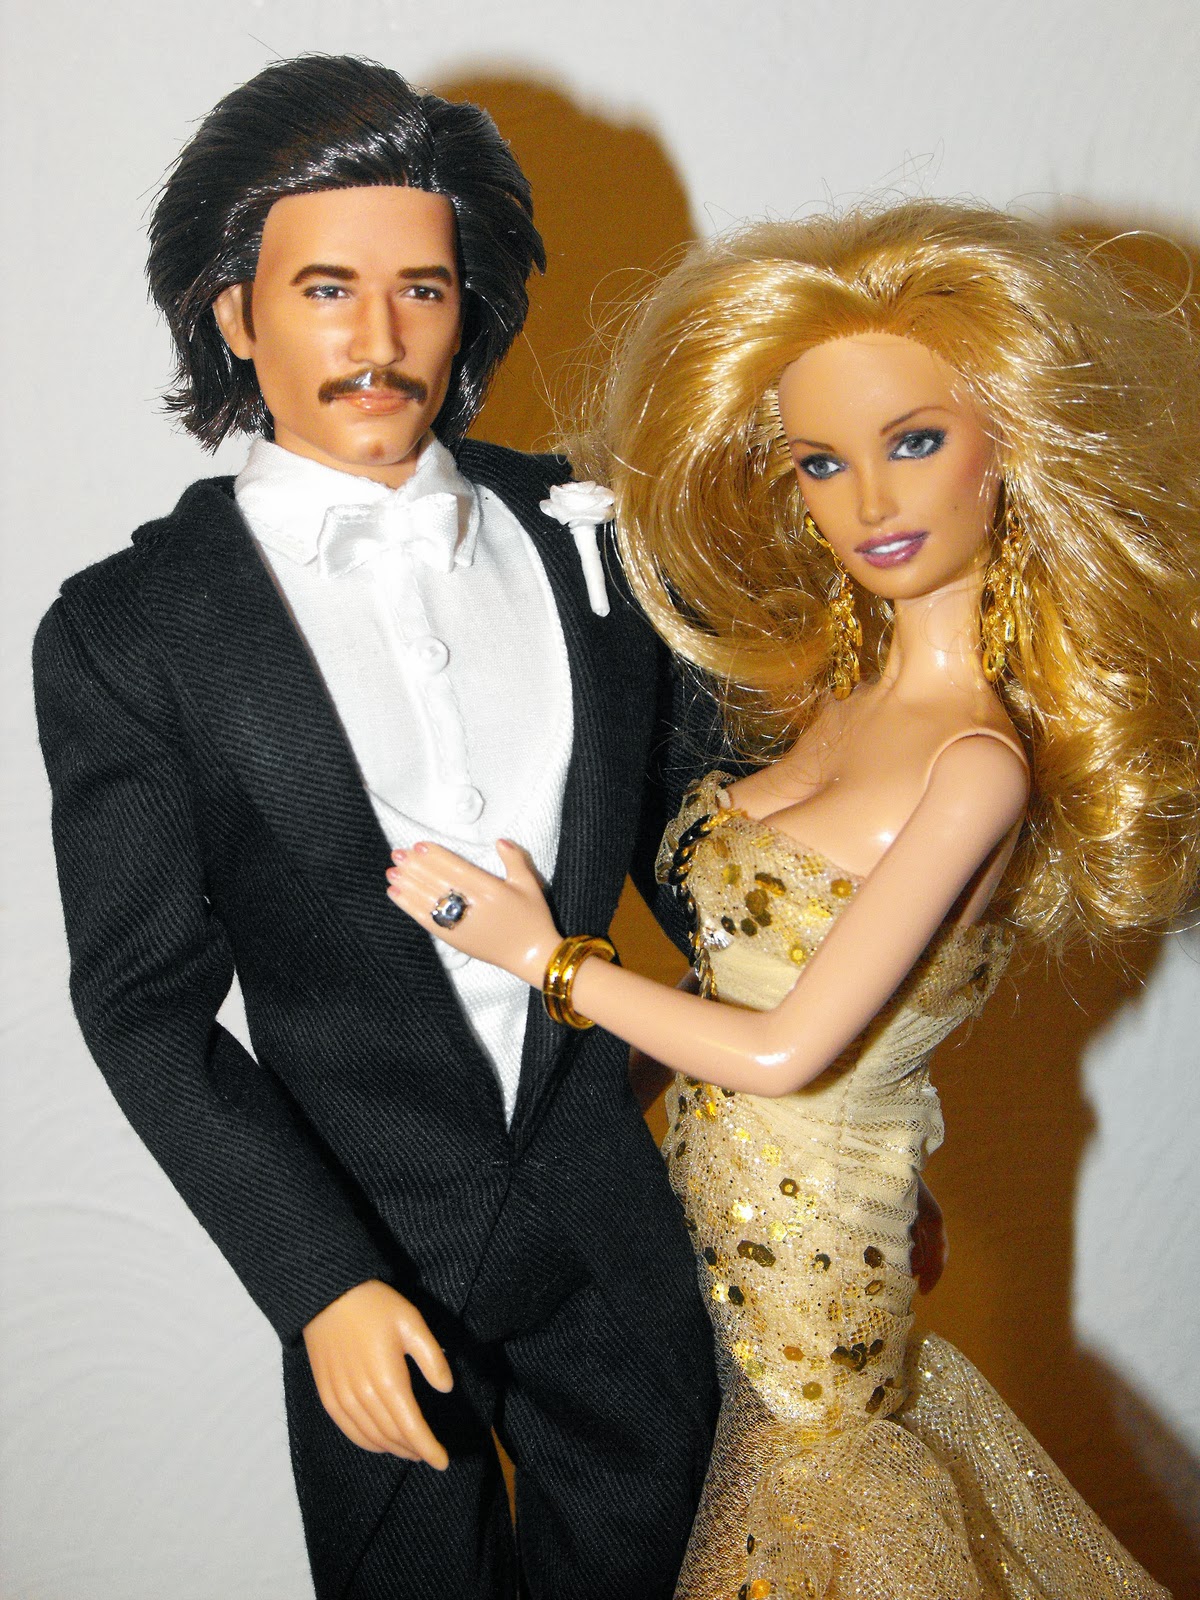 Barbie Doll Couple Hd Wallpapers Free Download - Stephanie Downer And Lee Horsley - HD Wallpaper 